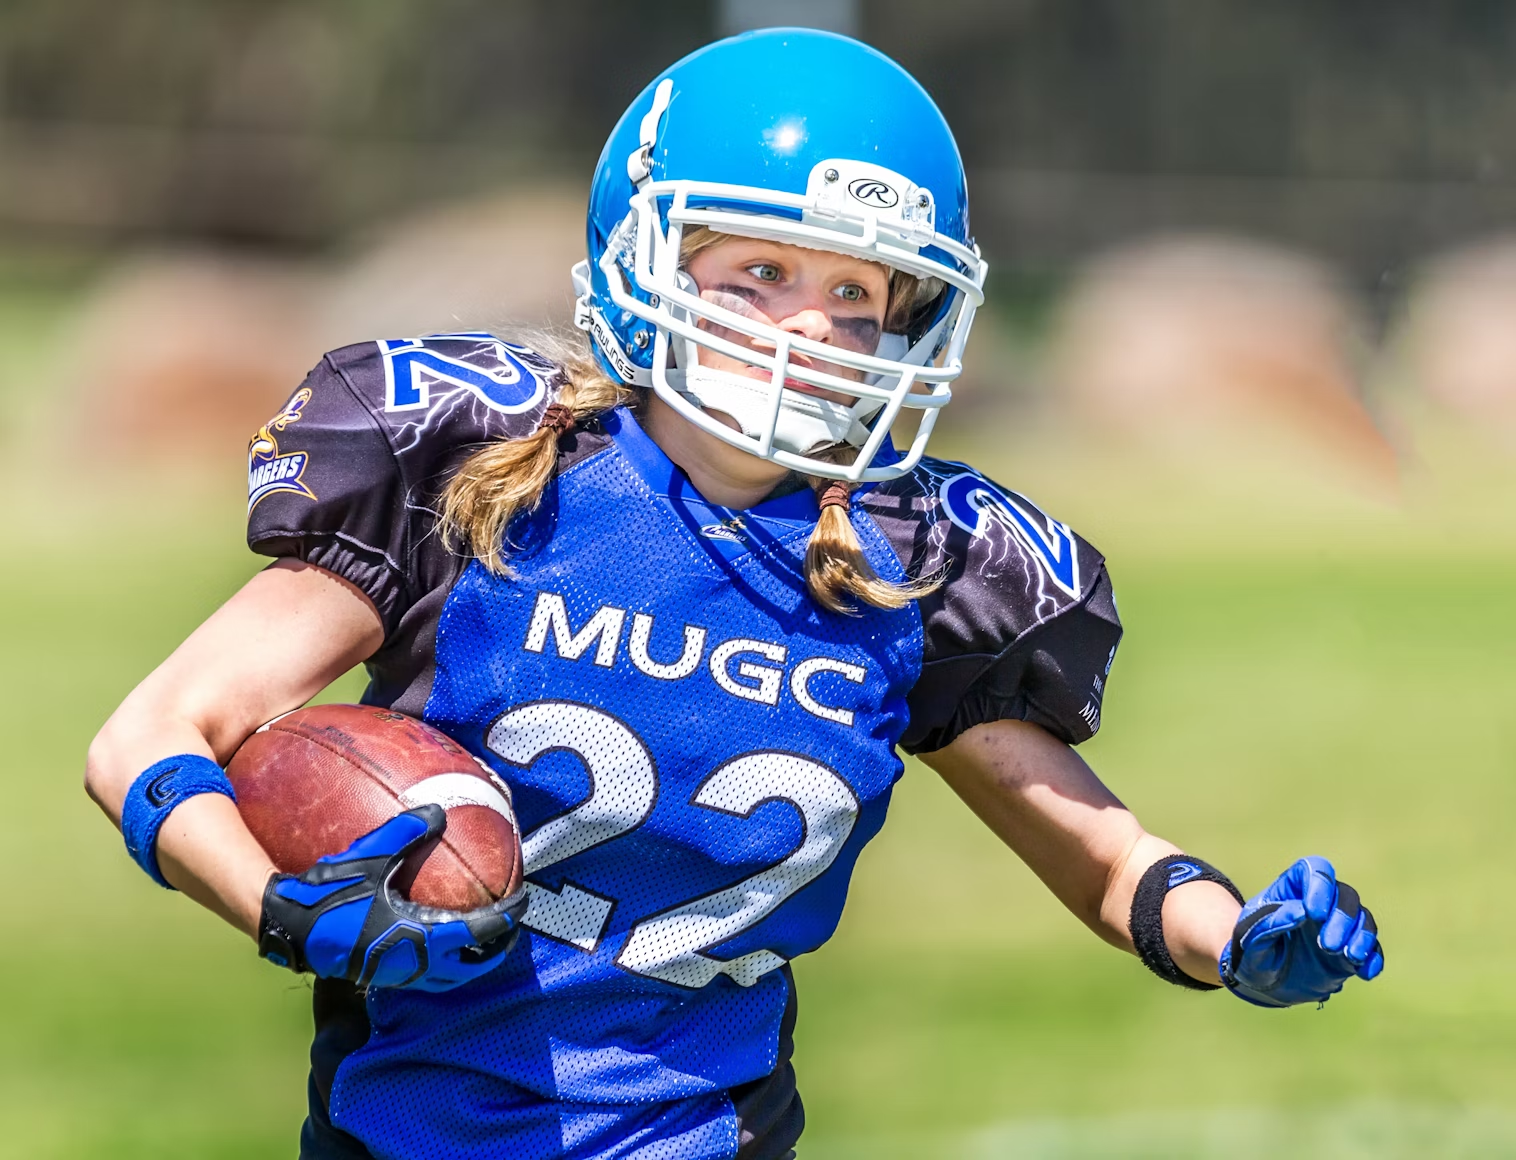 Young female football player running